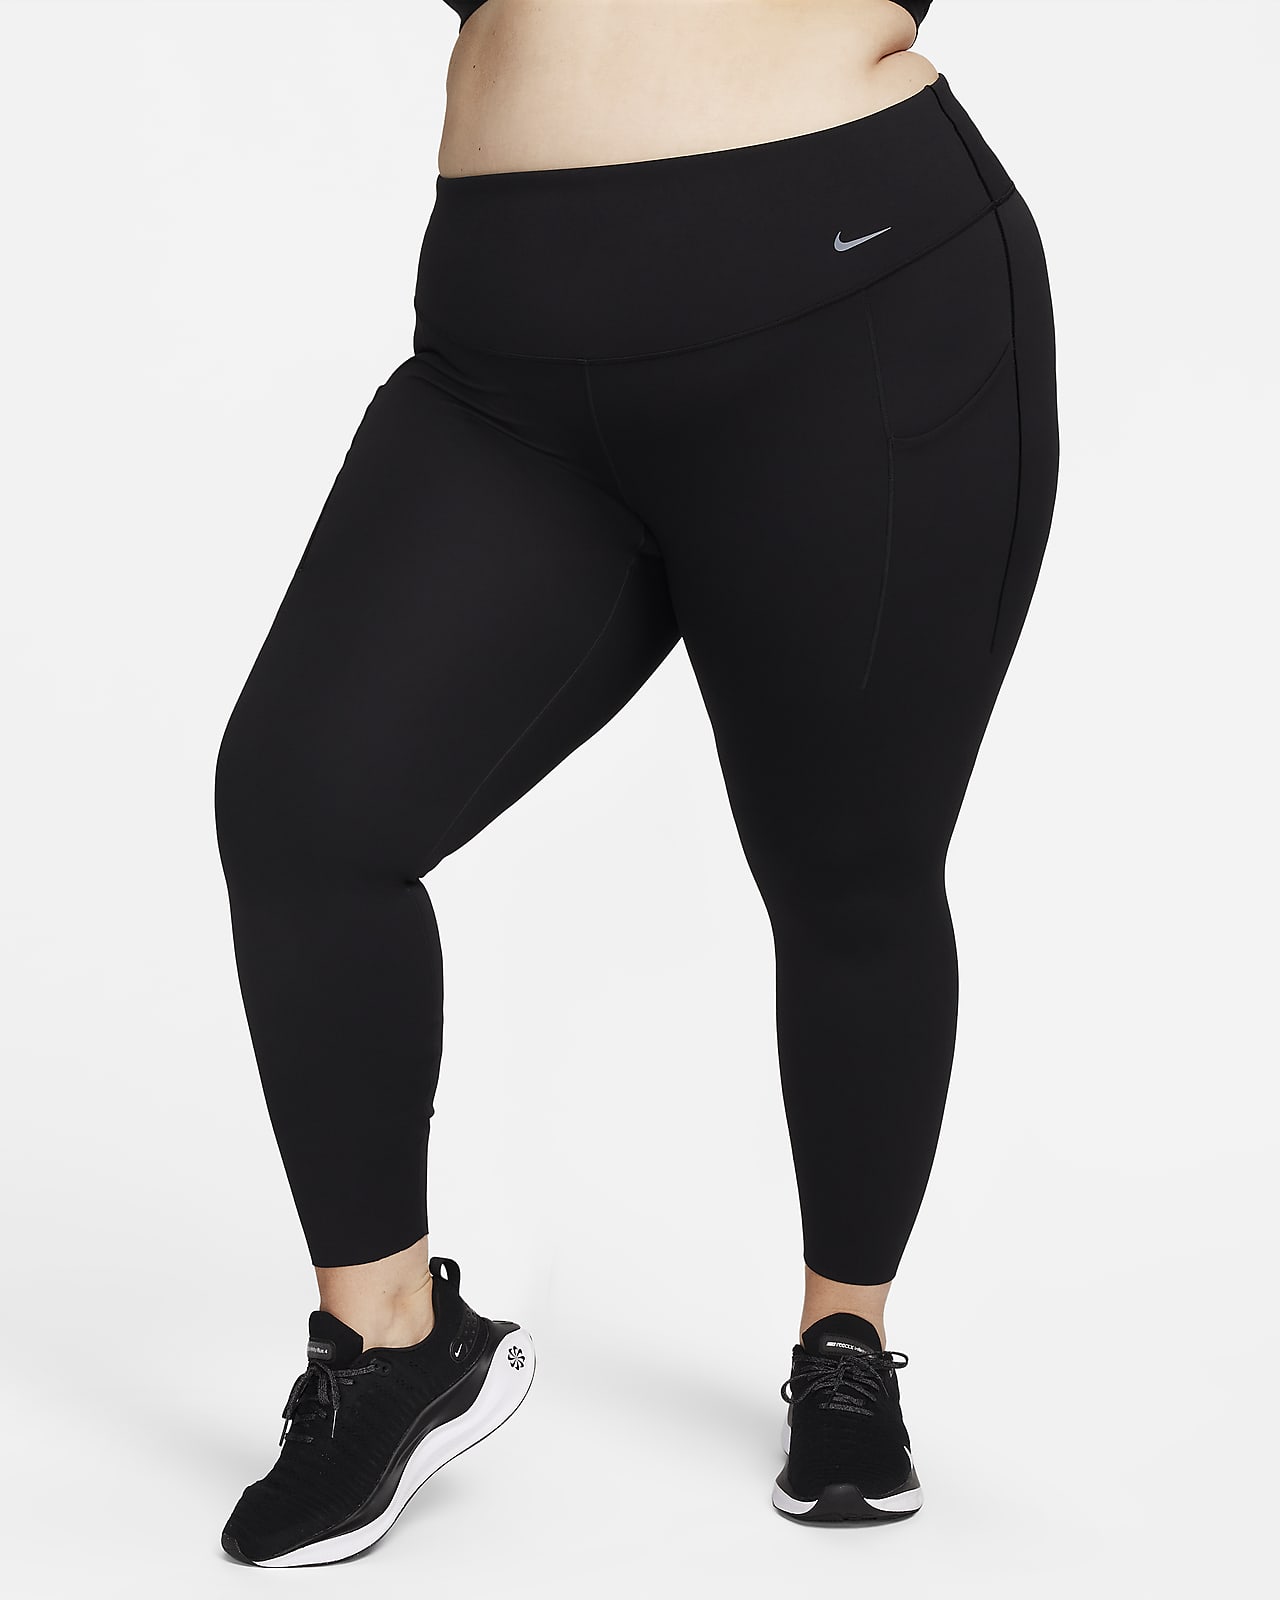 Nike Universa Medium-Support High-Waisted 7/8 Leggings with Pockets  'Mineral/Black' - DQ5897-309